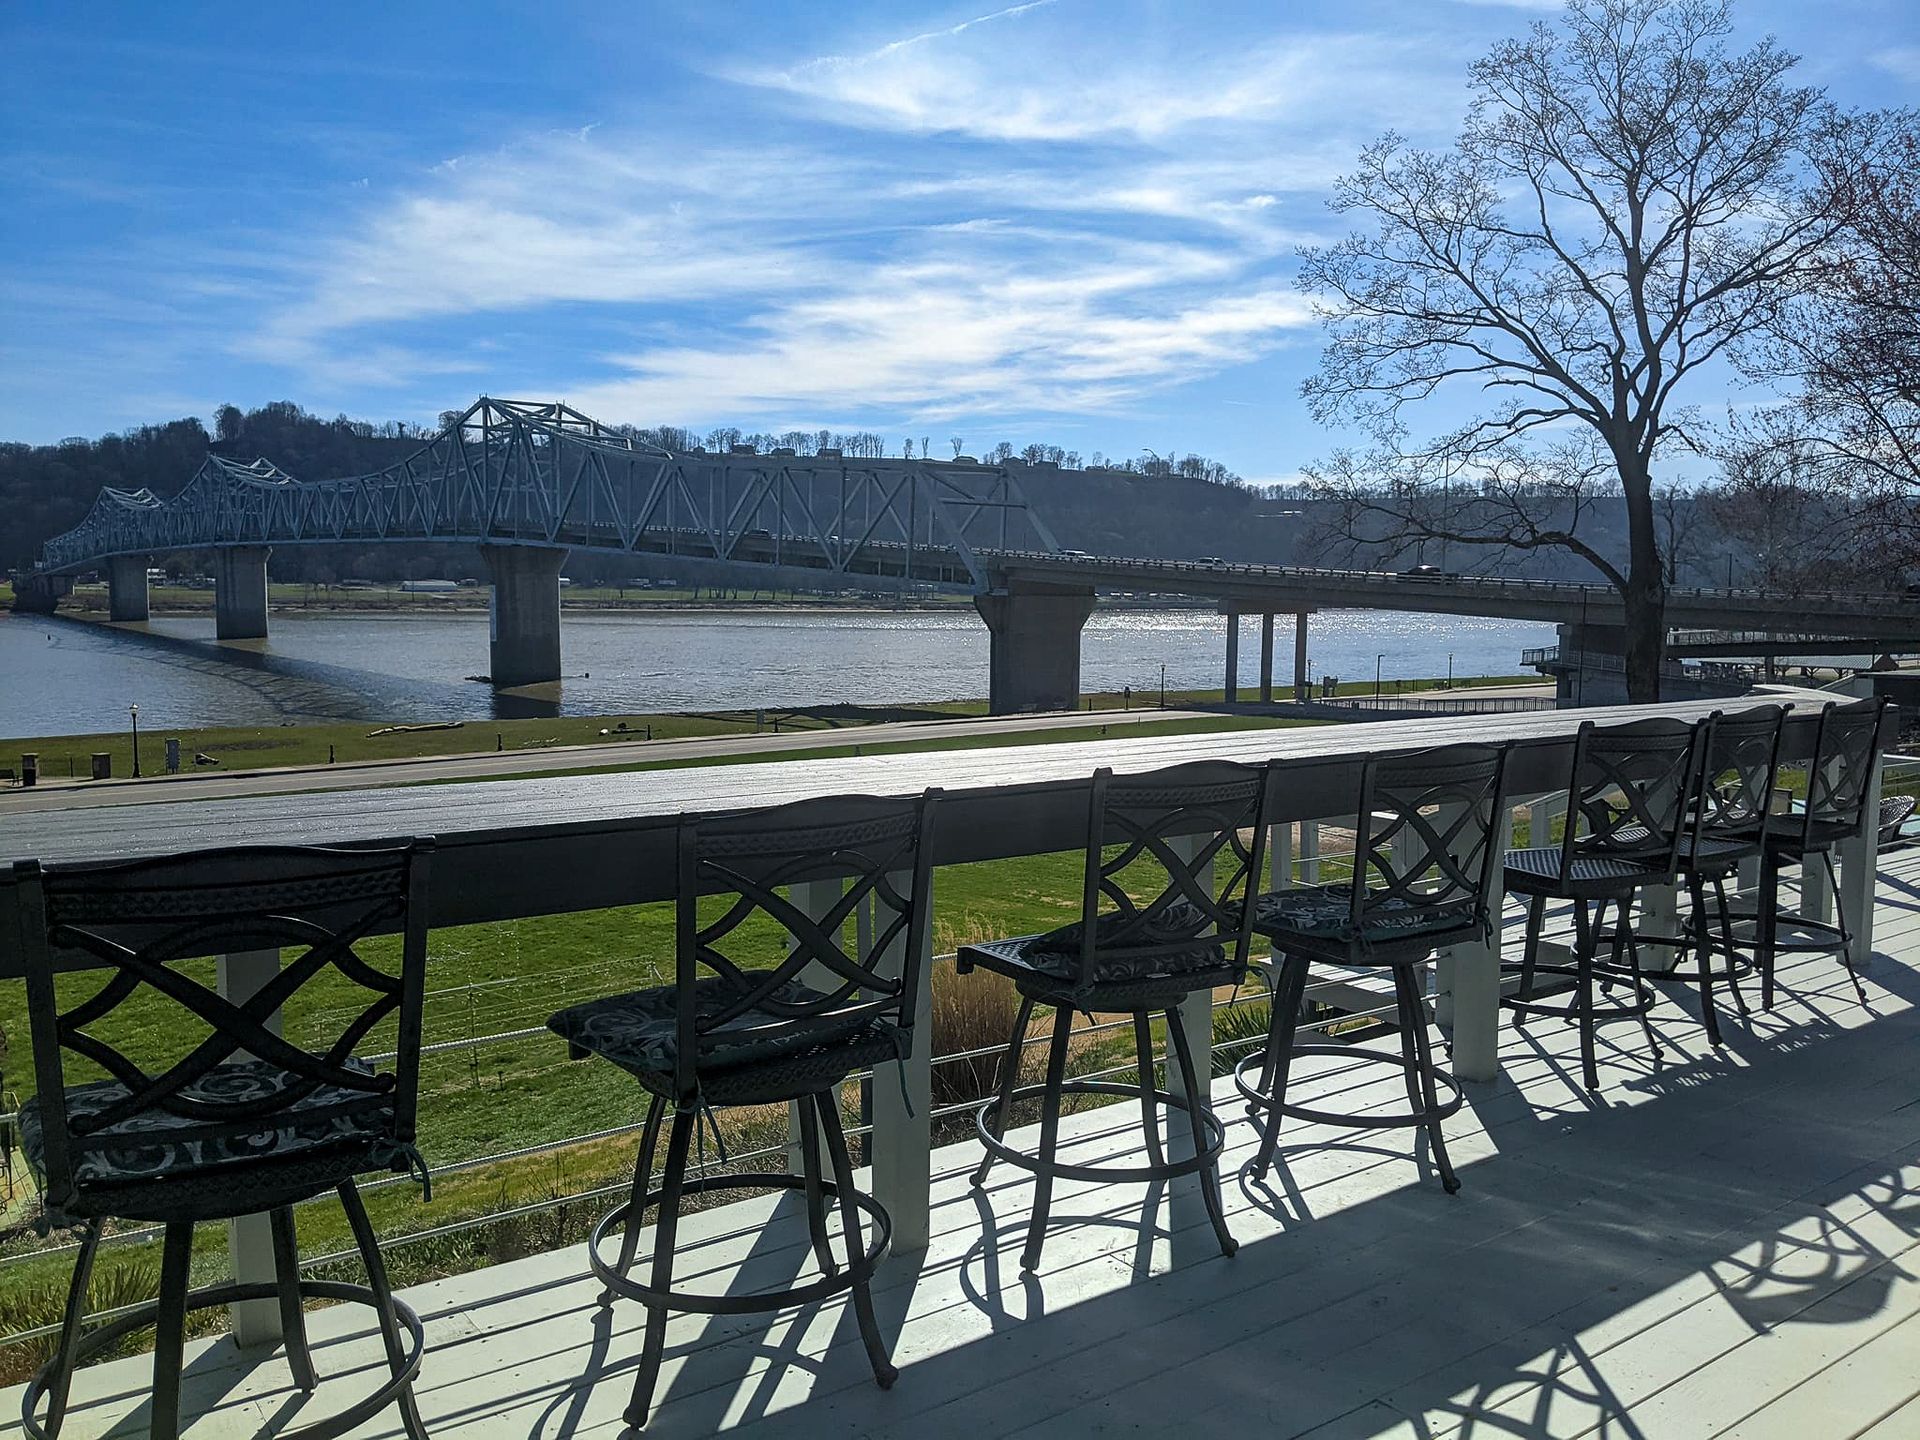 A row of chairs on a deck overlooking a river with a bridge in the background